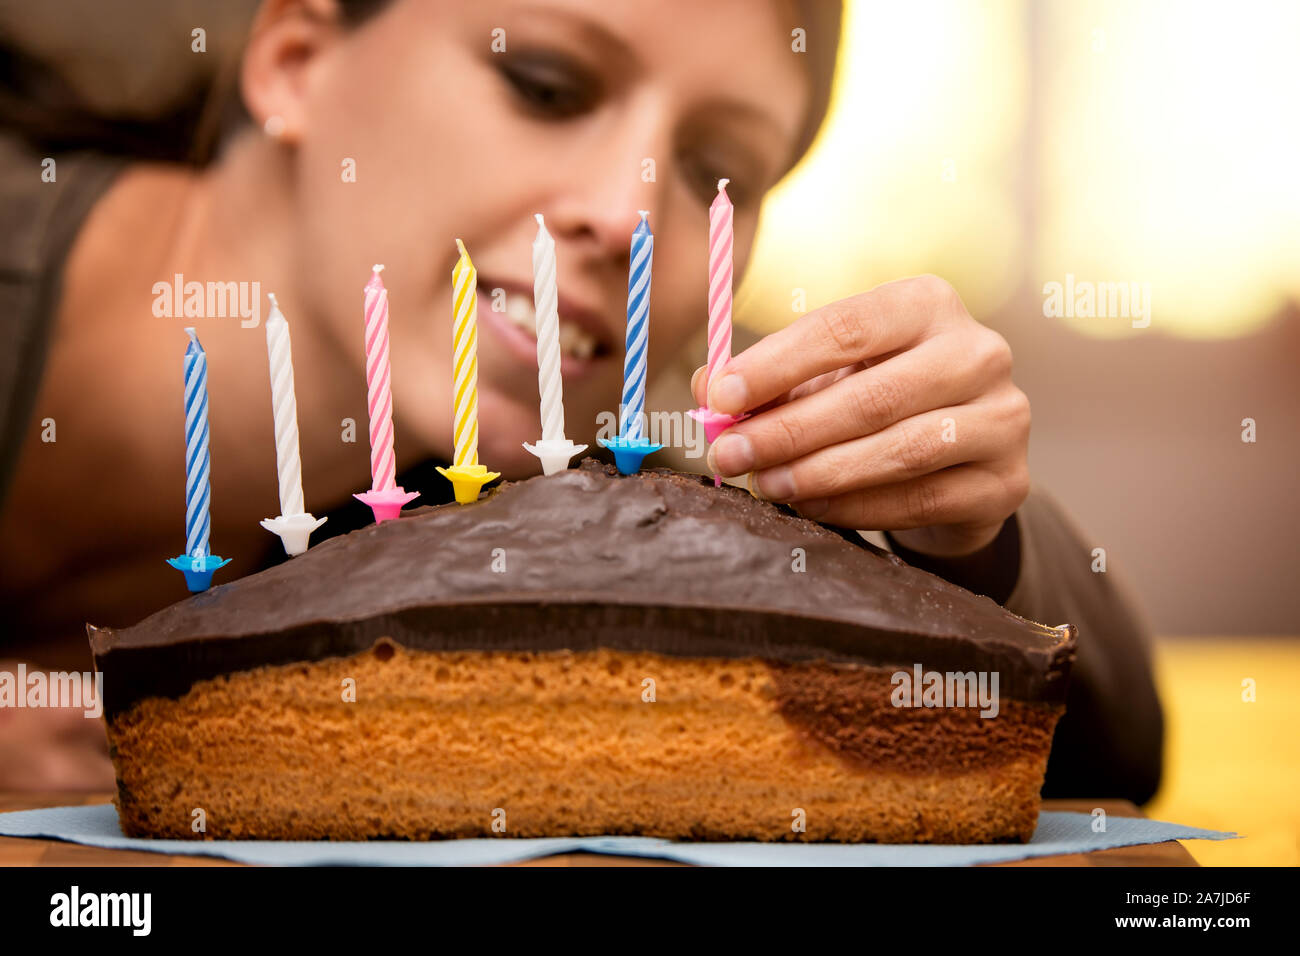 pretty woman is decorating a marble cake with colorful candles Stock Photo